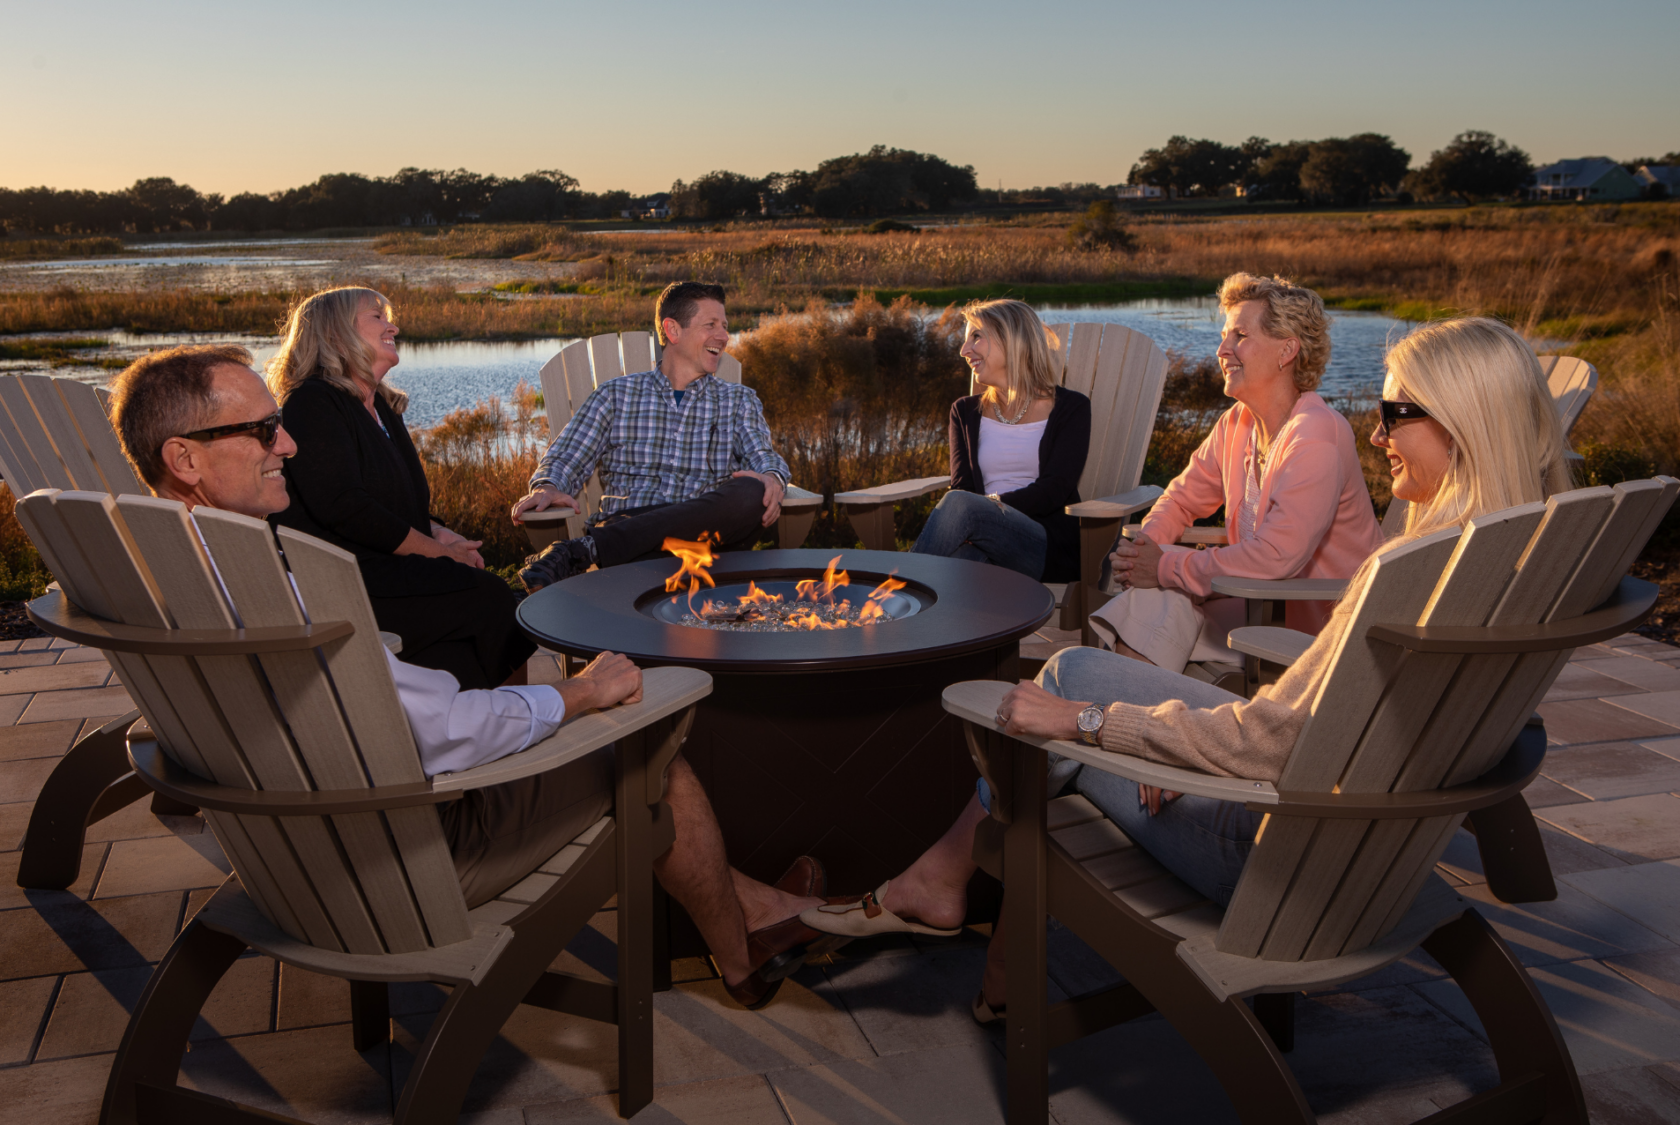 Residents gathered around the firepit in front of Lake Andrew at sunset.